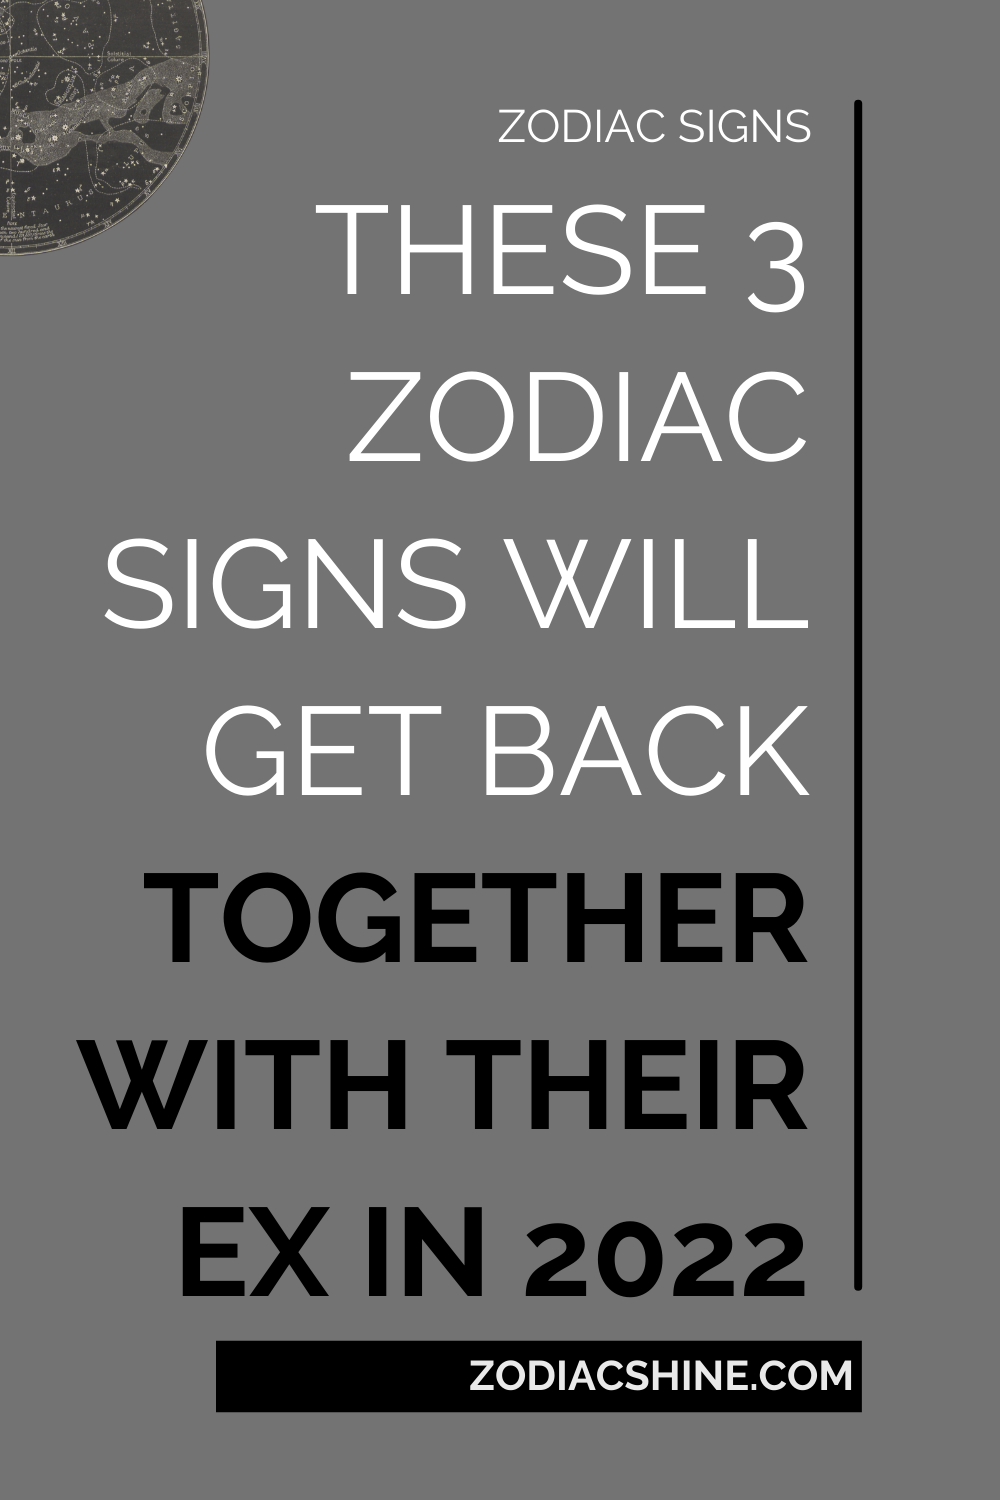 These 3 Zodiac Signs Will Get Back Together With Their Ex In 2022